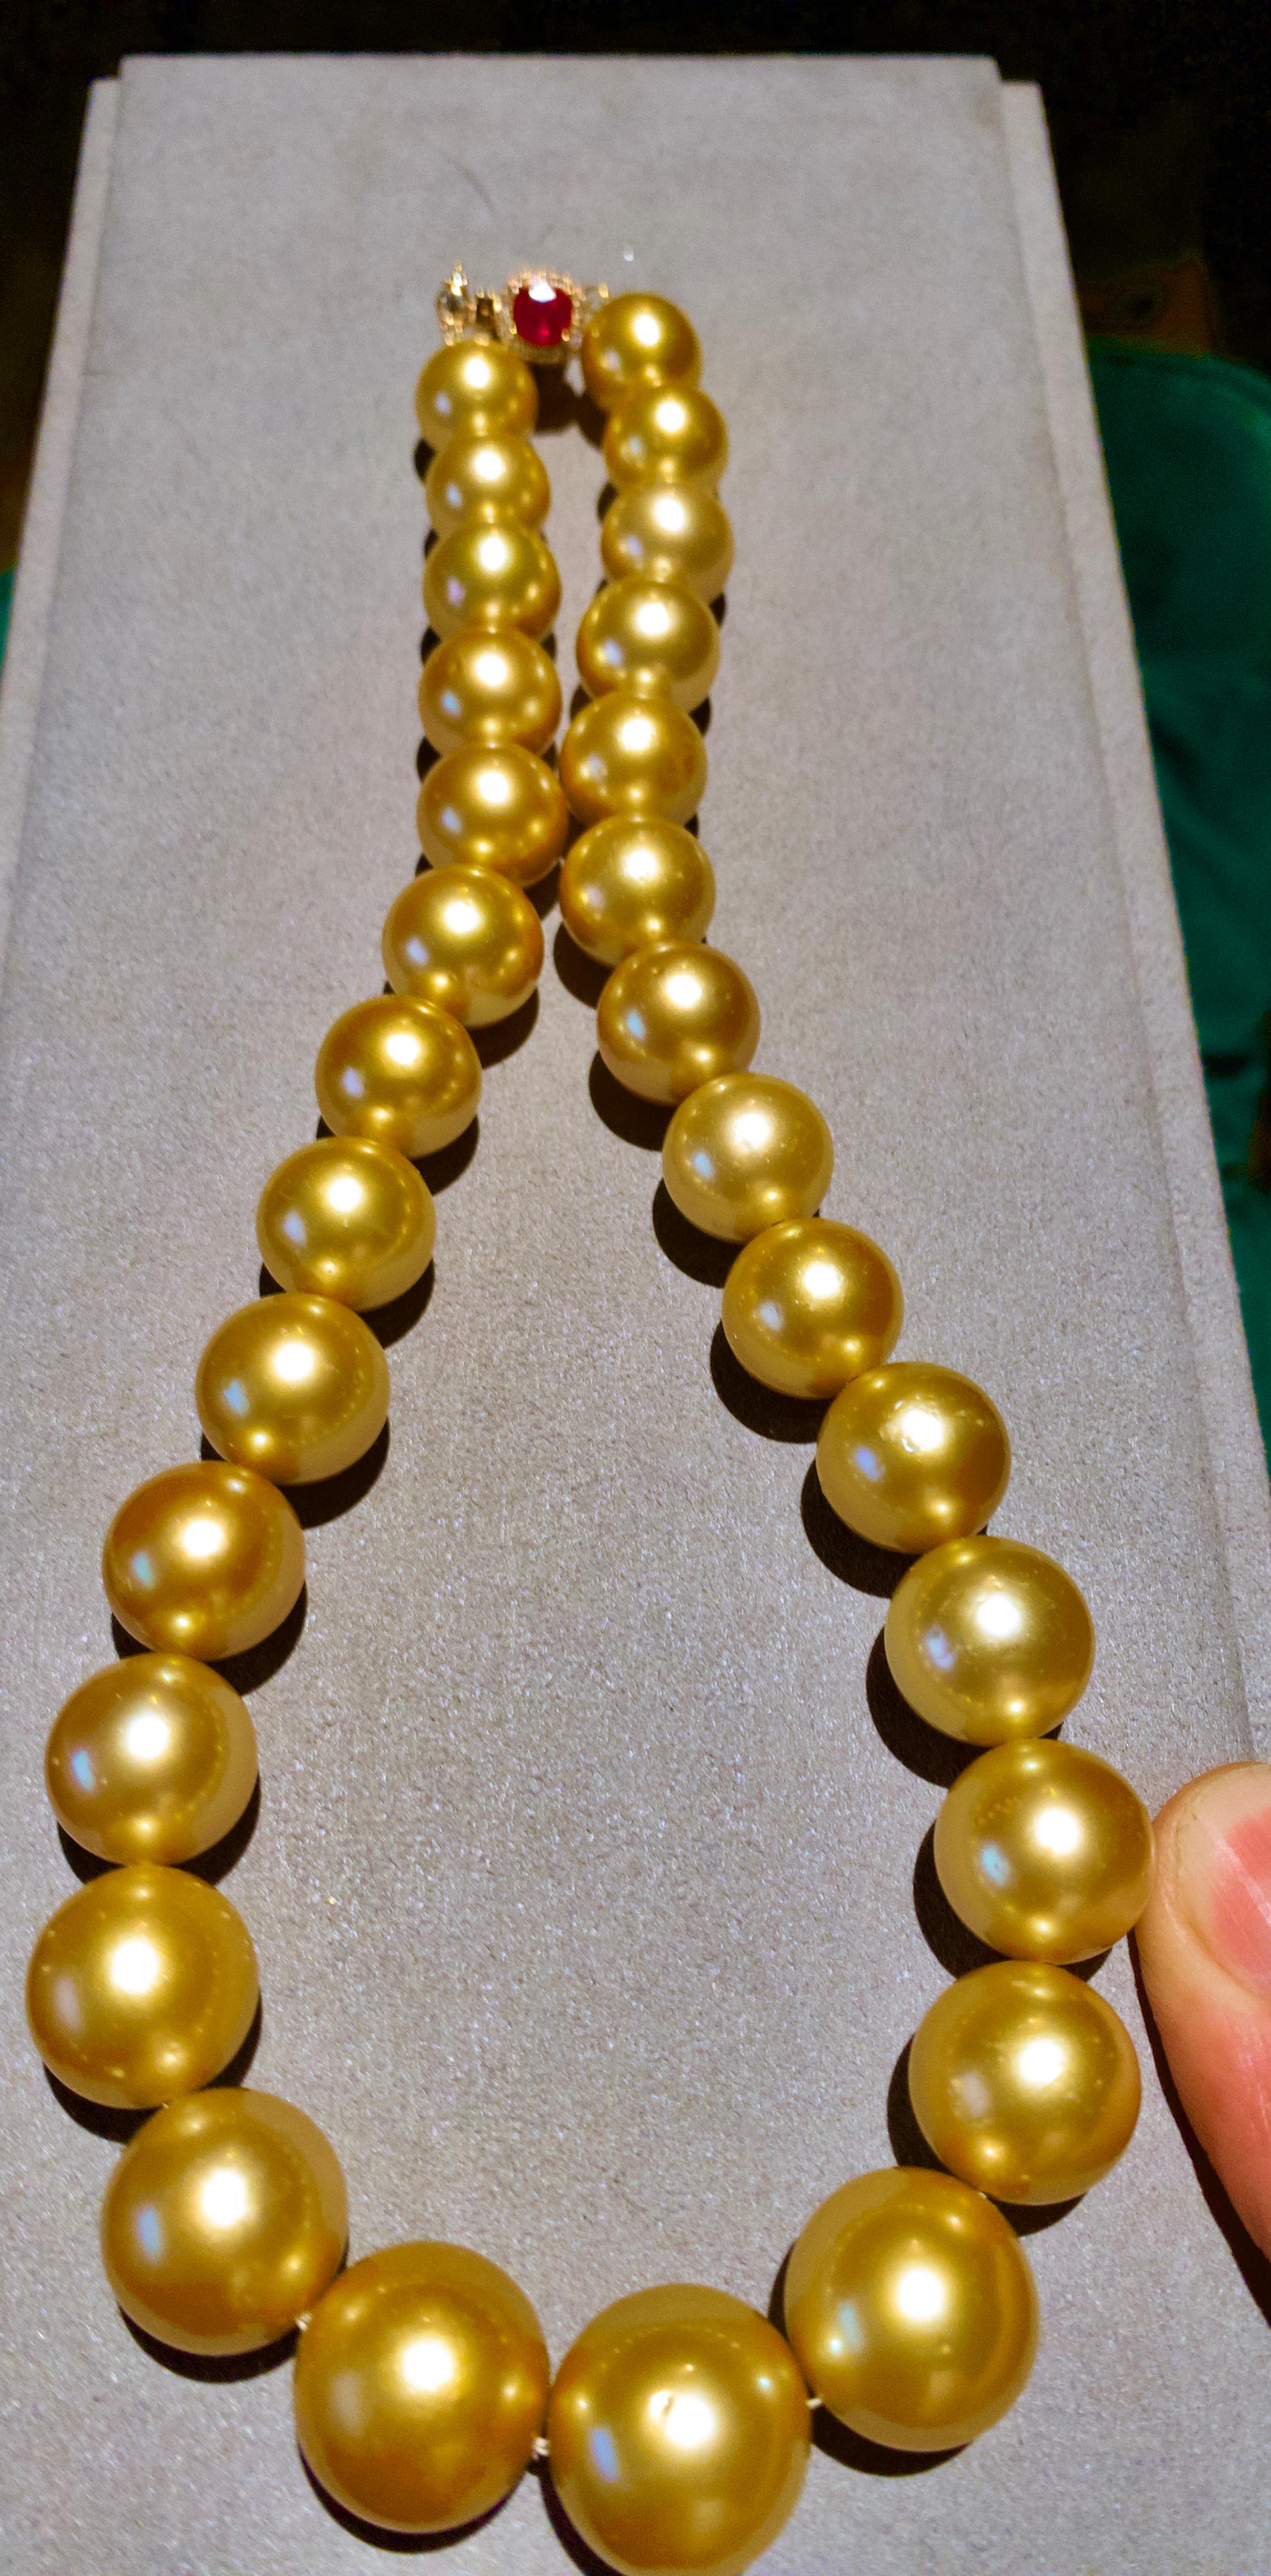 Eostre Deep Golden South Sea Pearl Necklace with 18K Ruby and Diamond Clasp In New Condition For Sale In Melbourne, AU